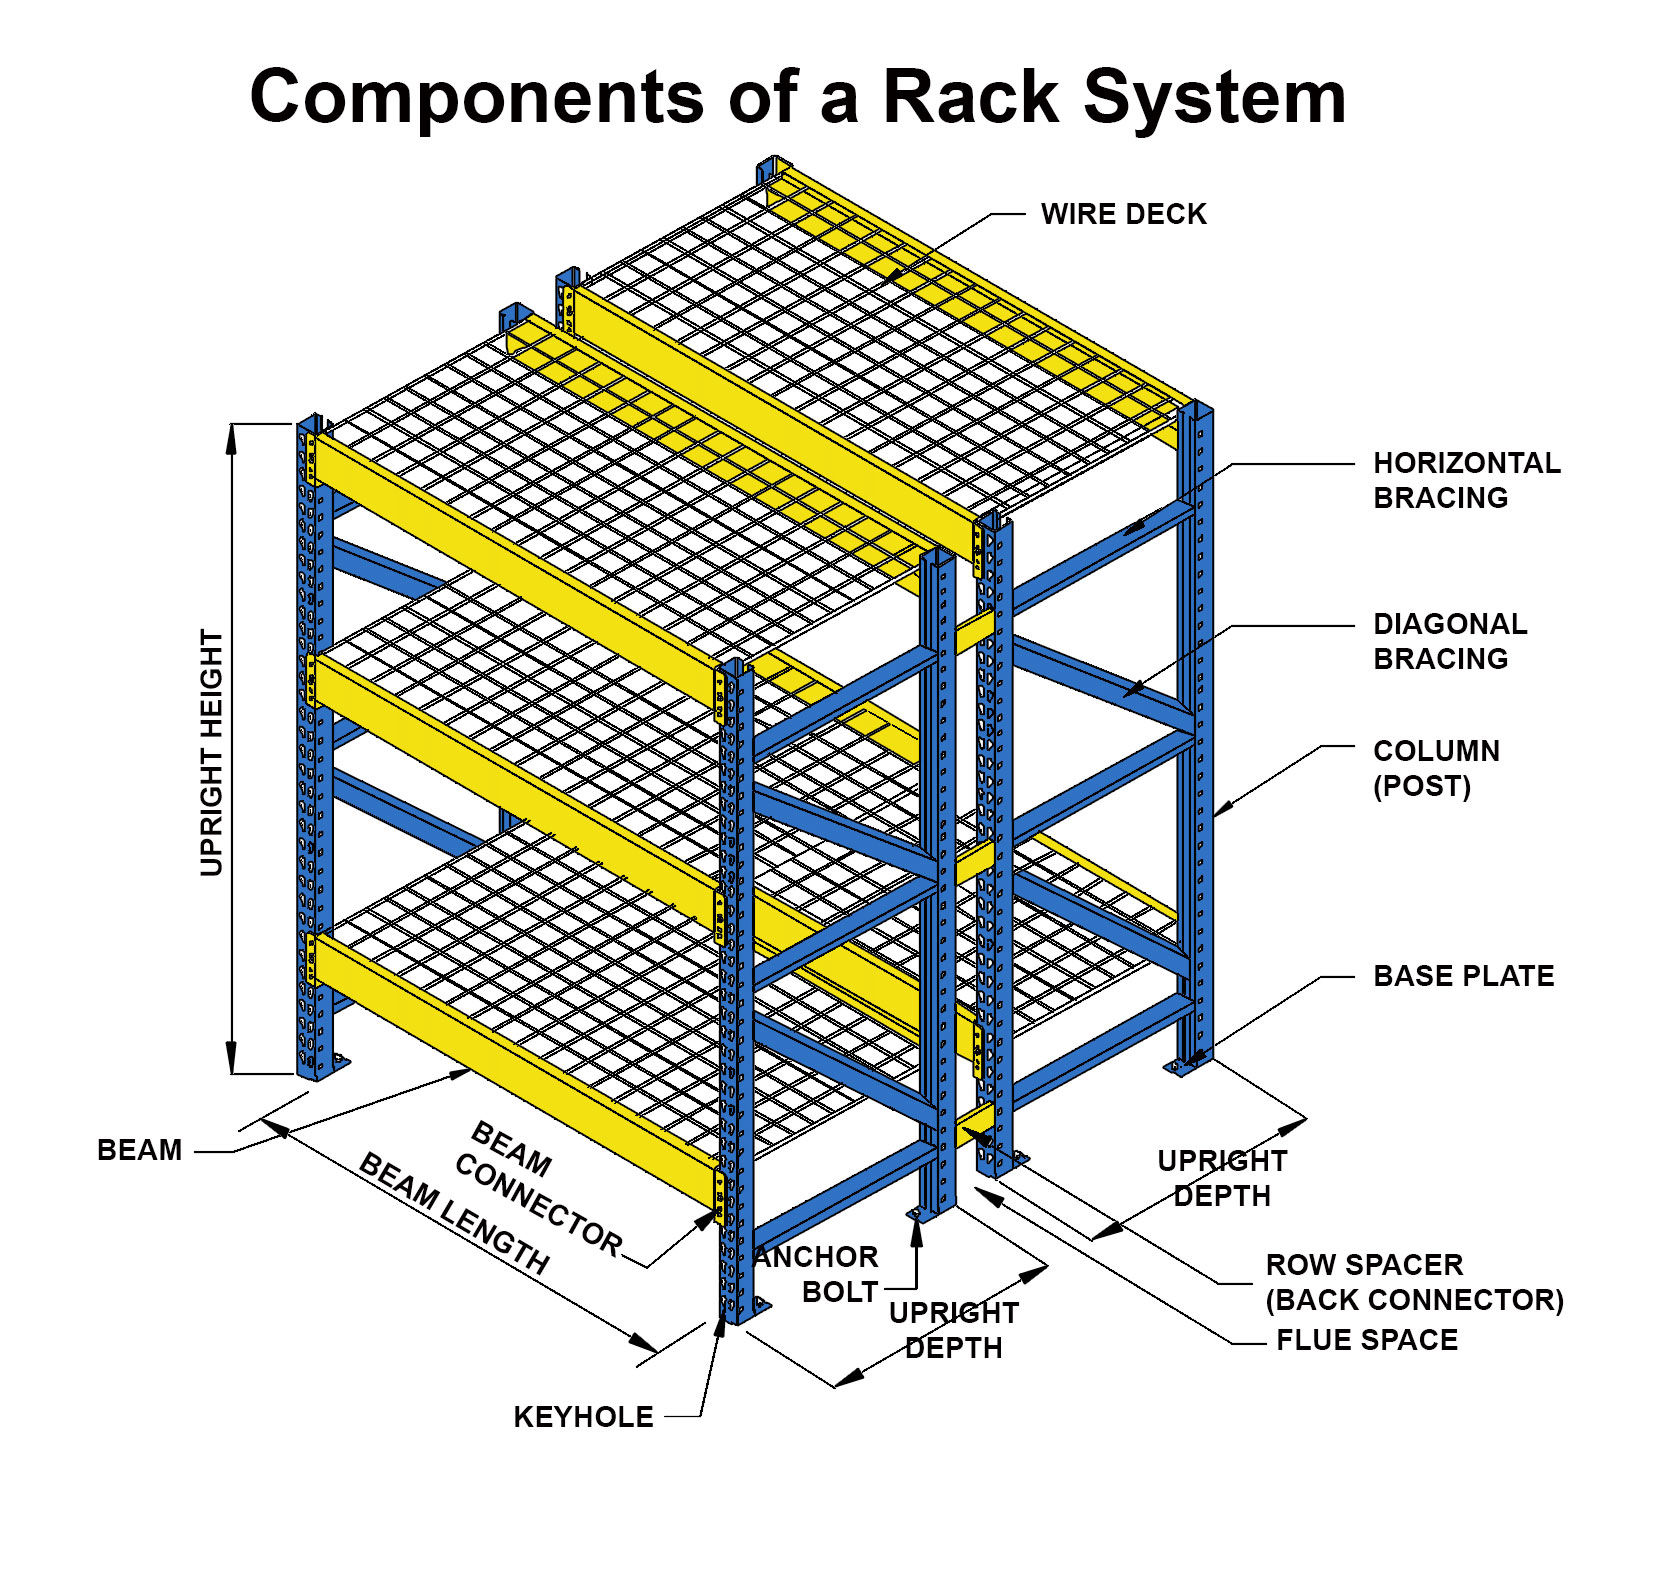 components-of-a-rack-system-web.jpg